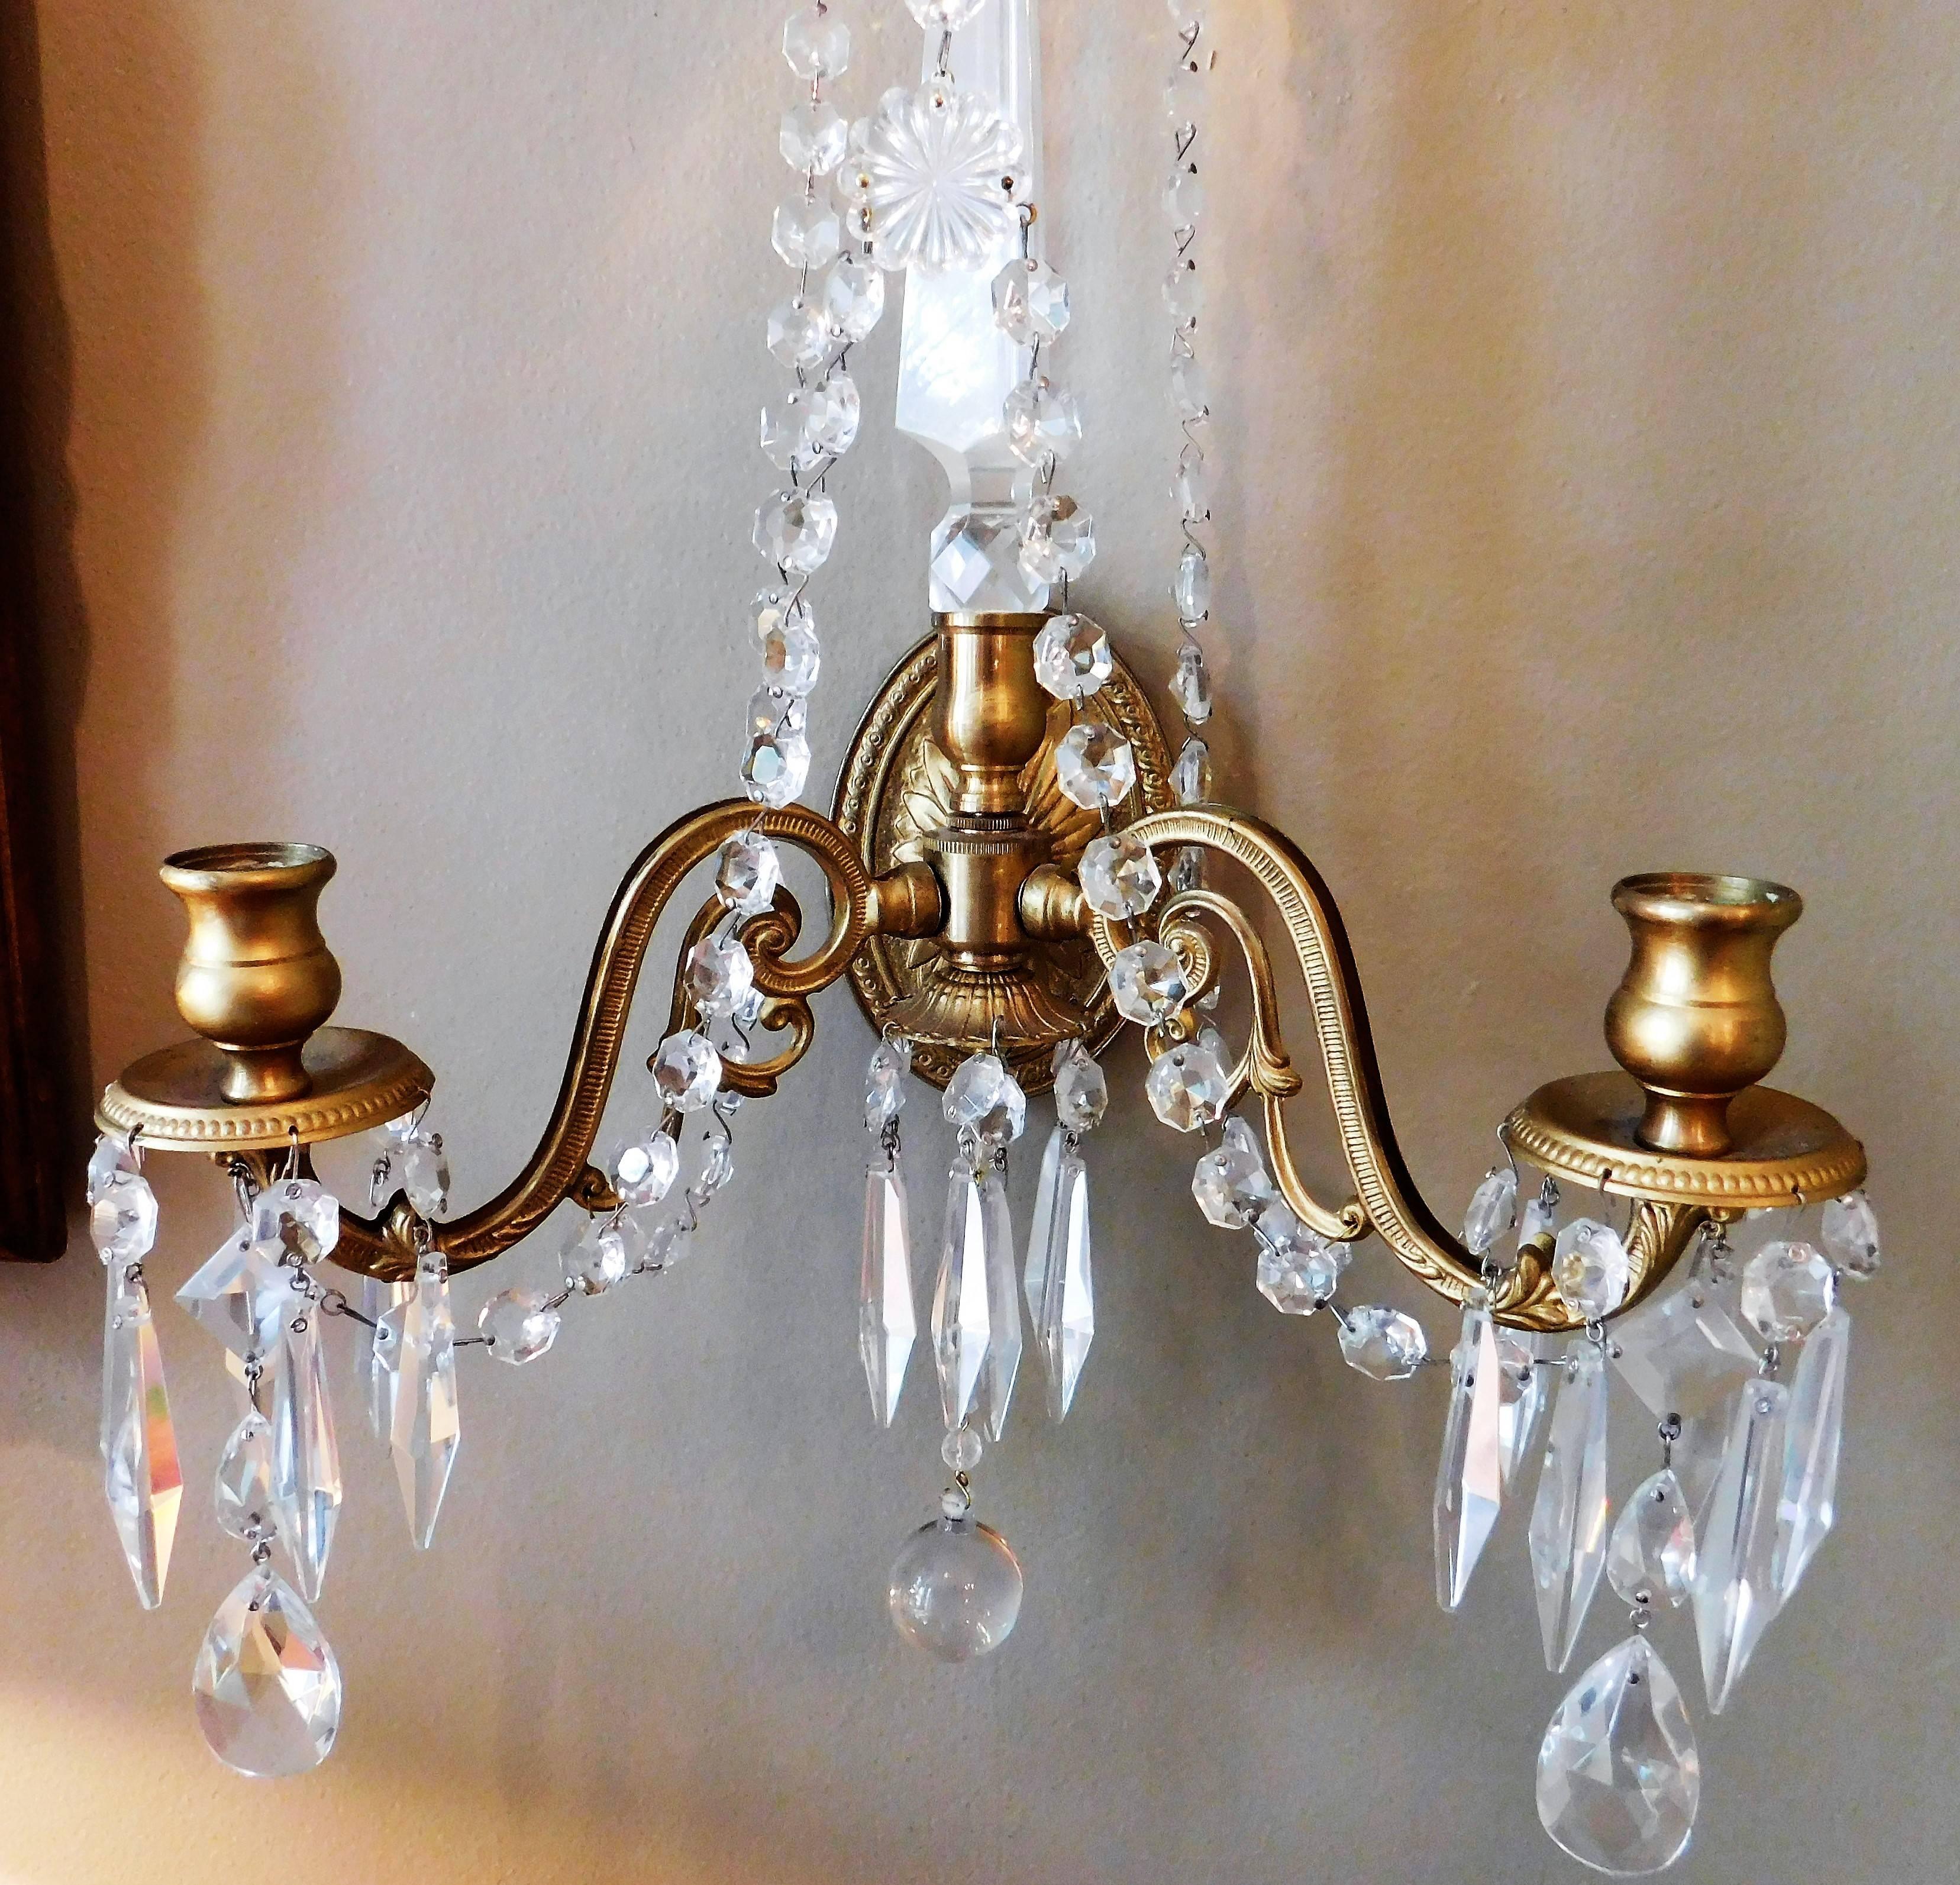 Pair of Regency Style Sconces In Excellent Condition For Sale In Alexandria, VA